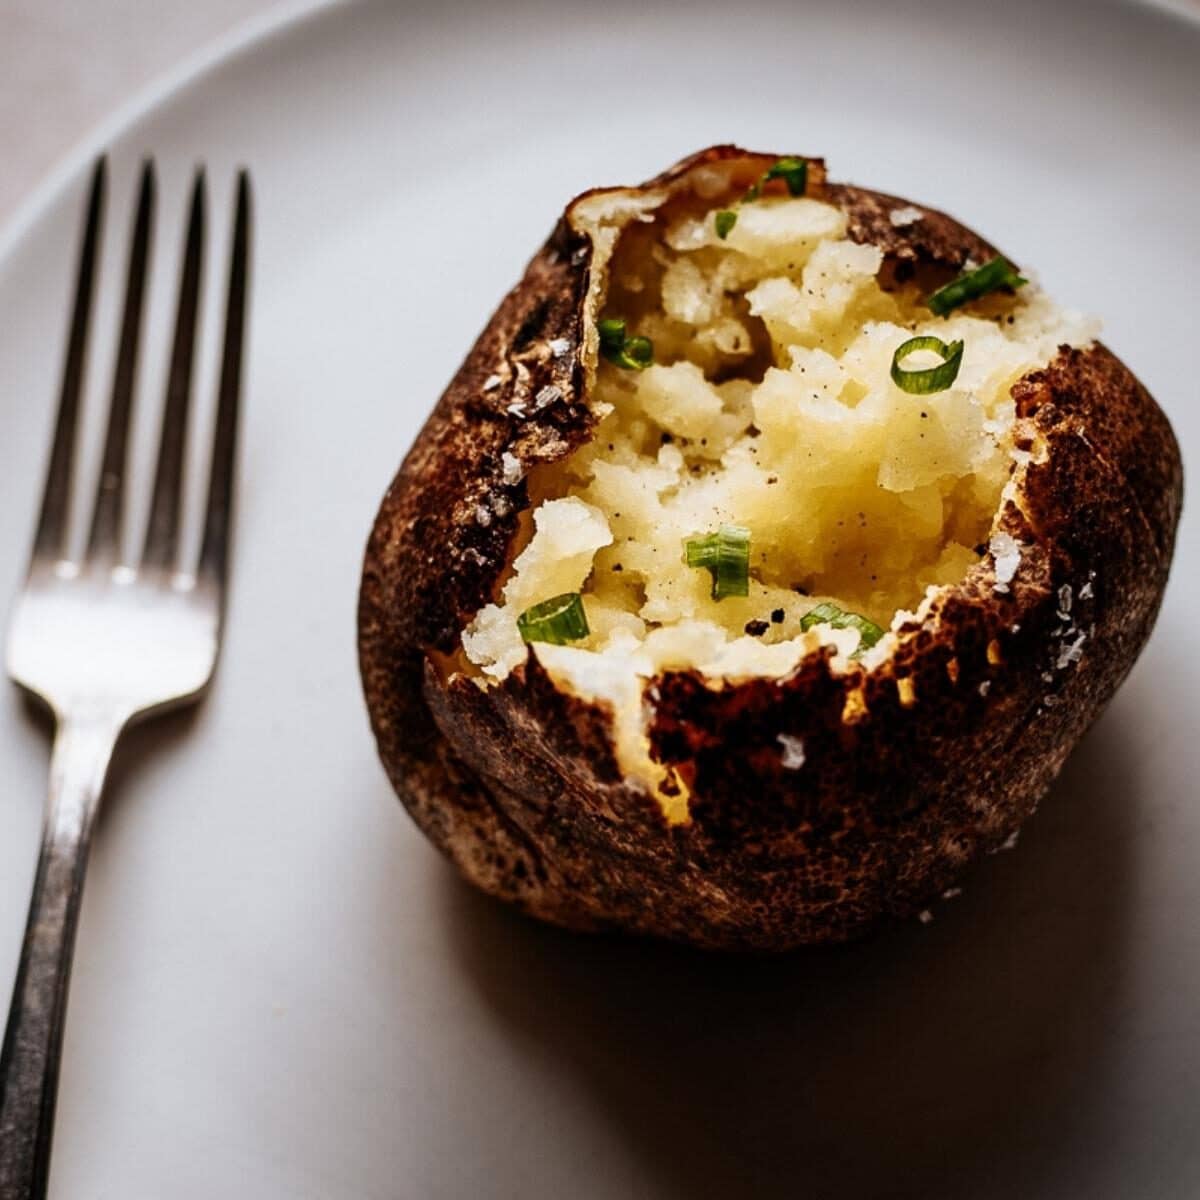 Best Baked Potato Recipe - Cookie and Kate